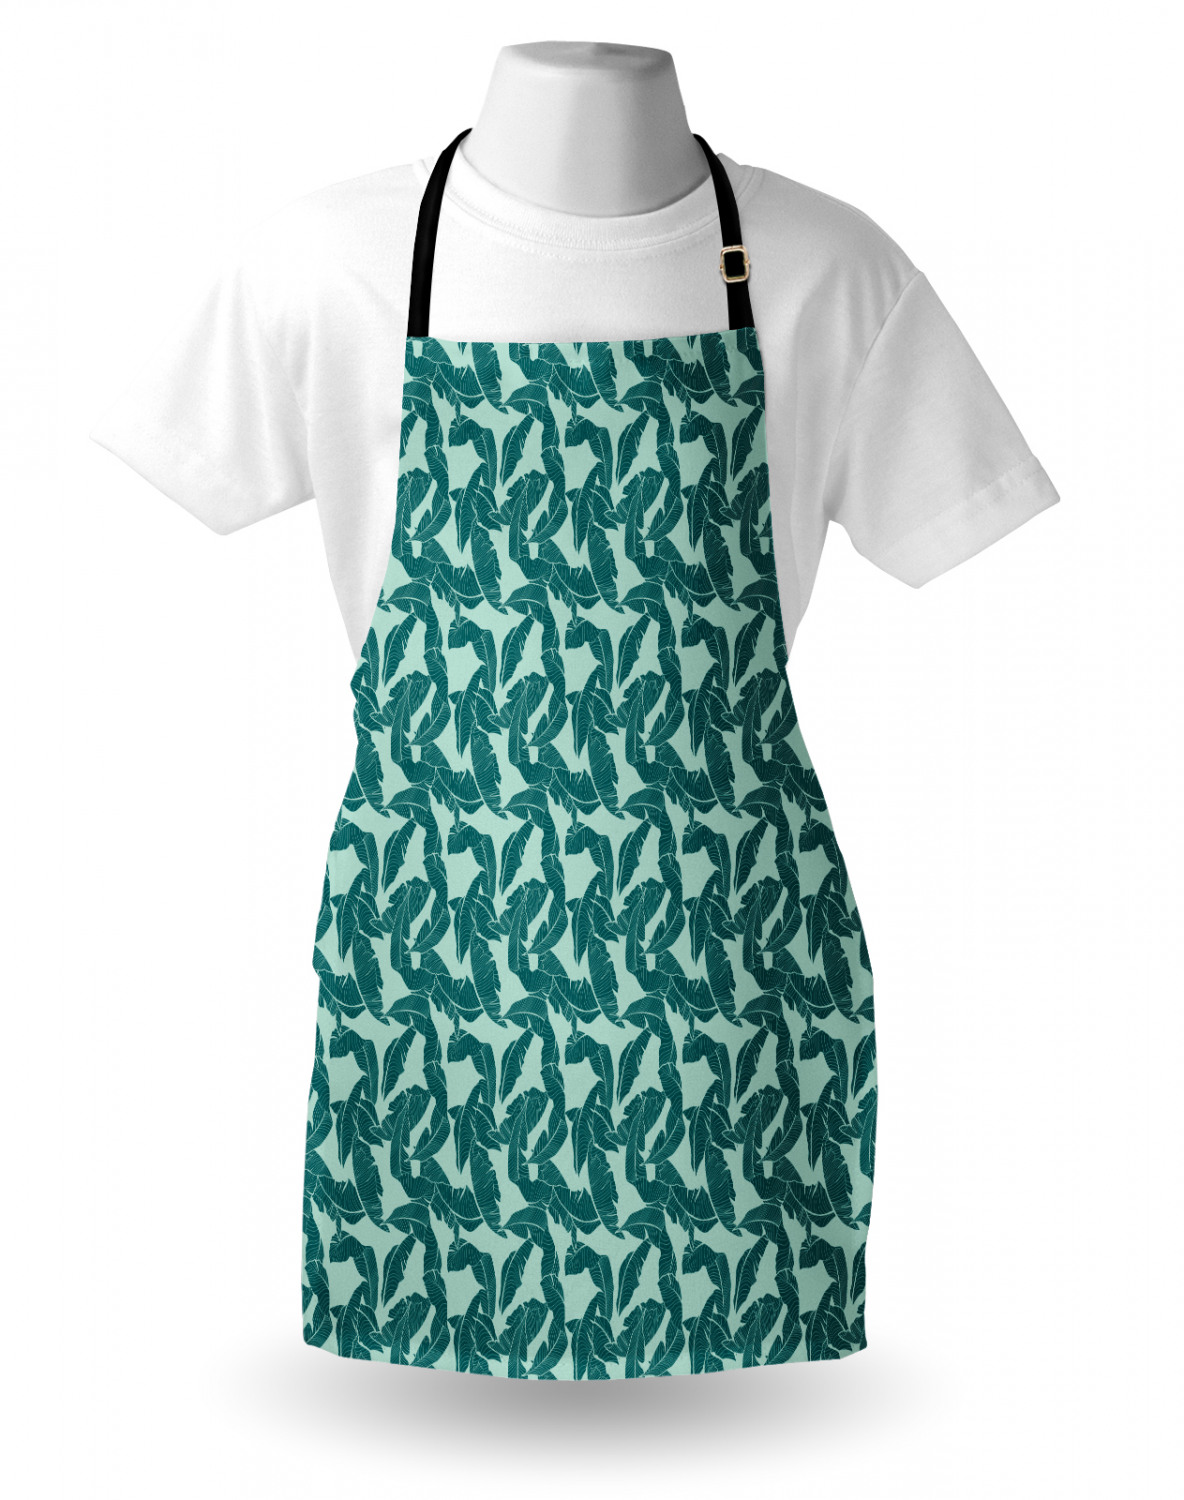 Details about   Ambesonne Tropical Apron Unisex Kitchen Bib with Adjustable Neck Cooking Baking 